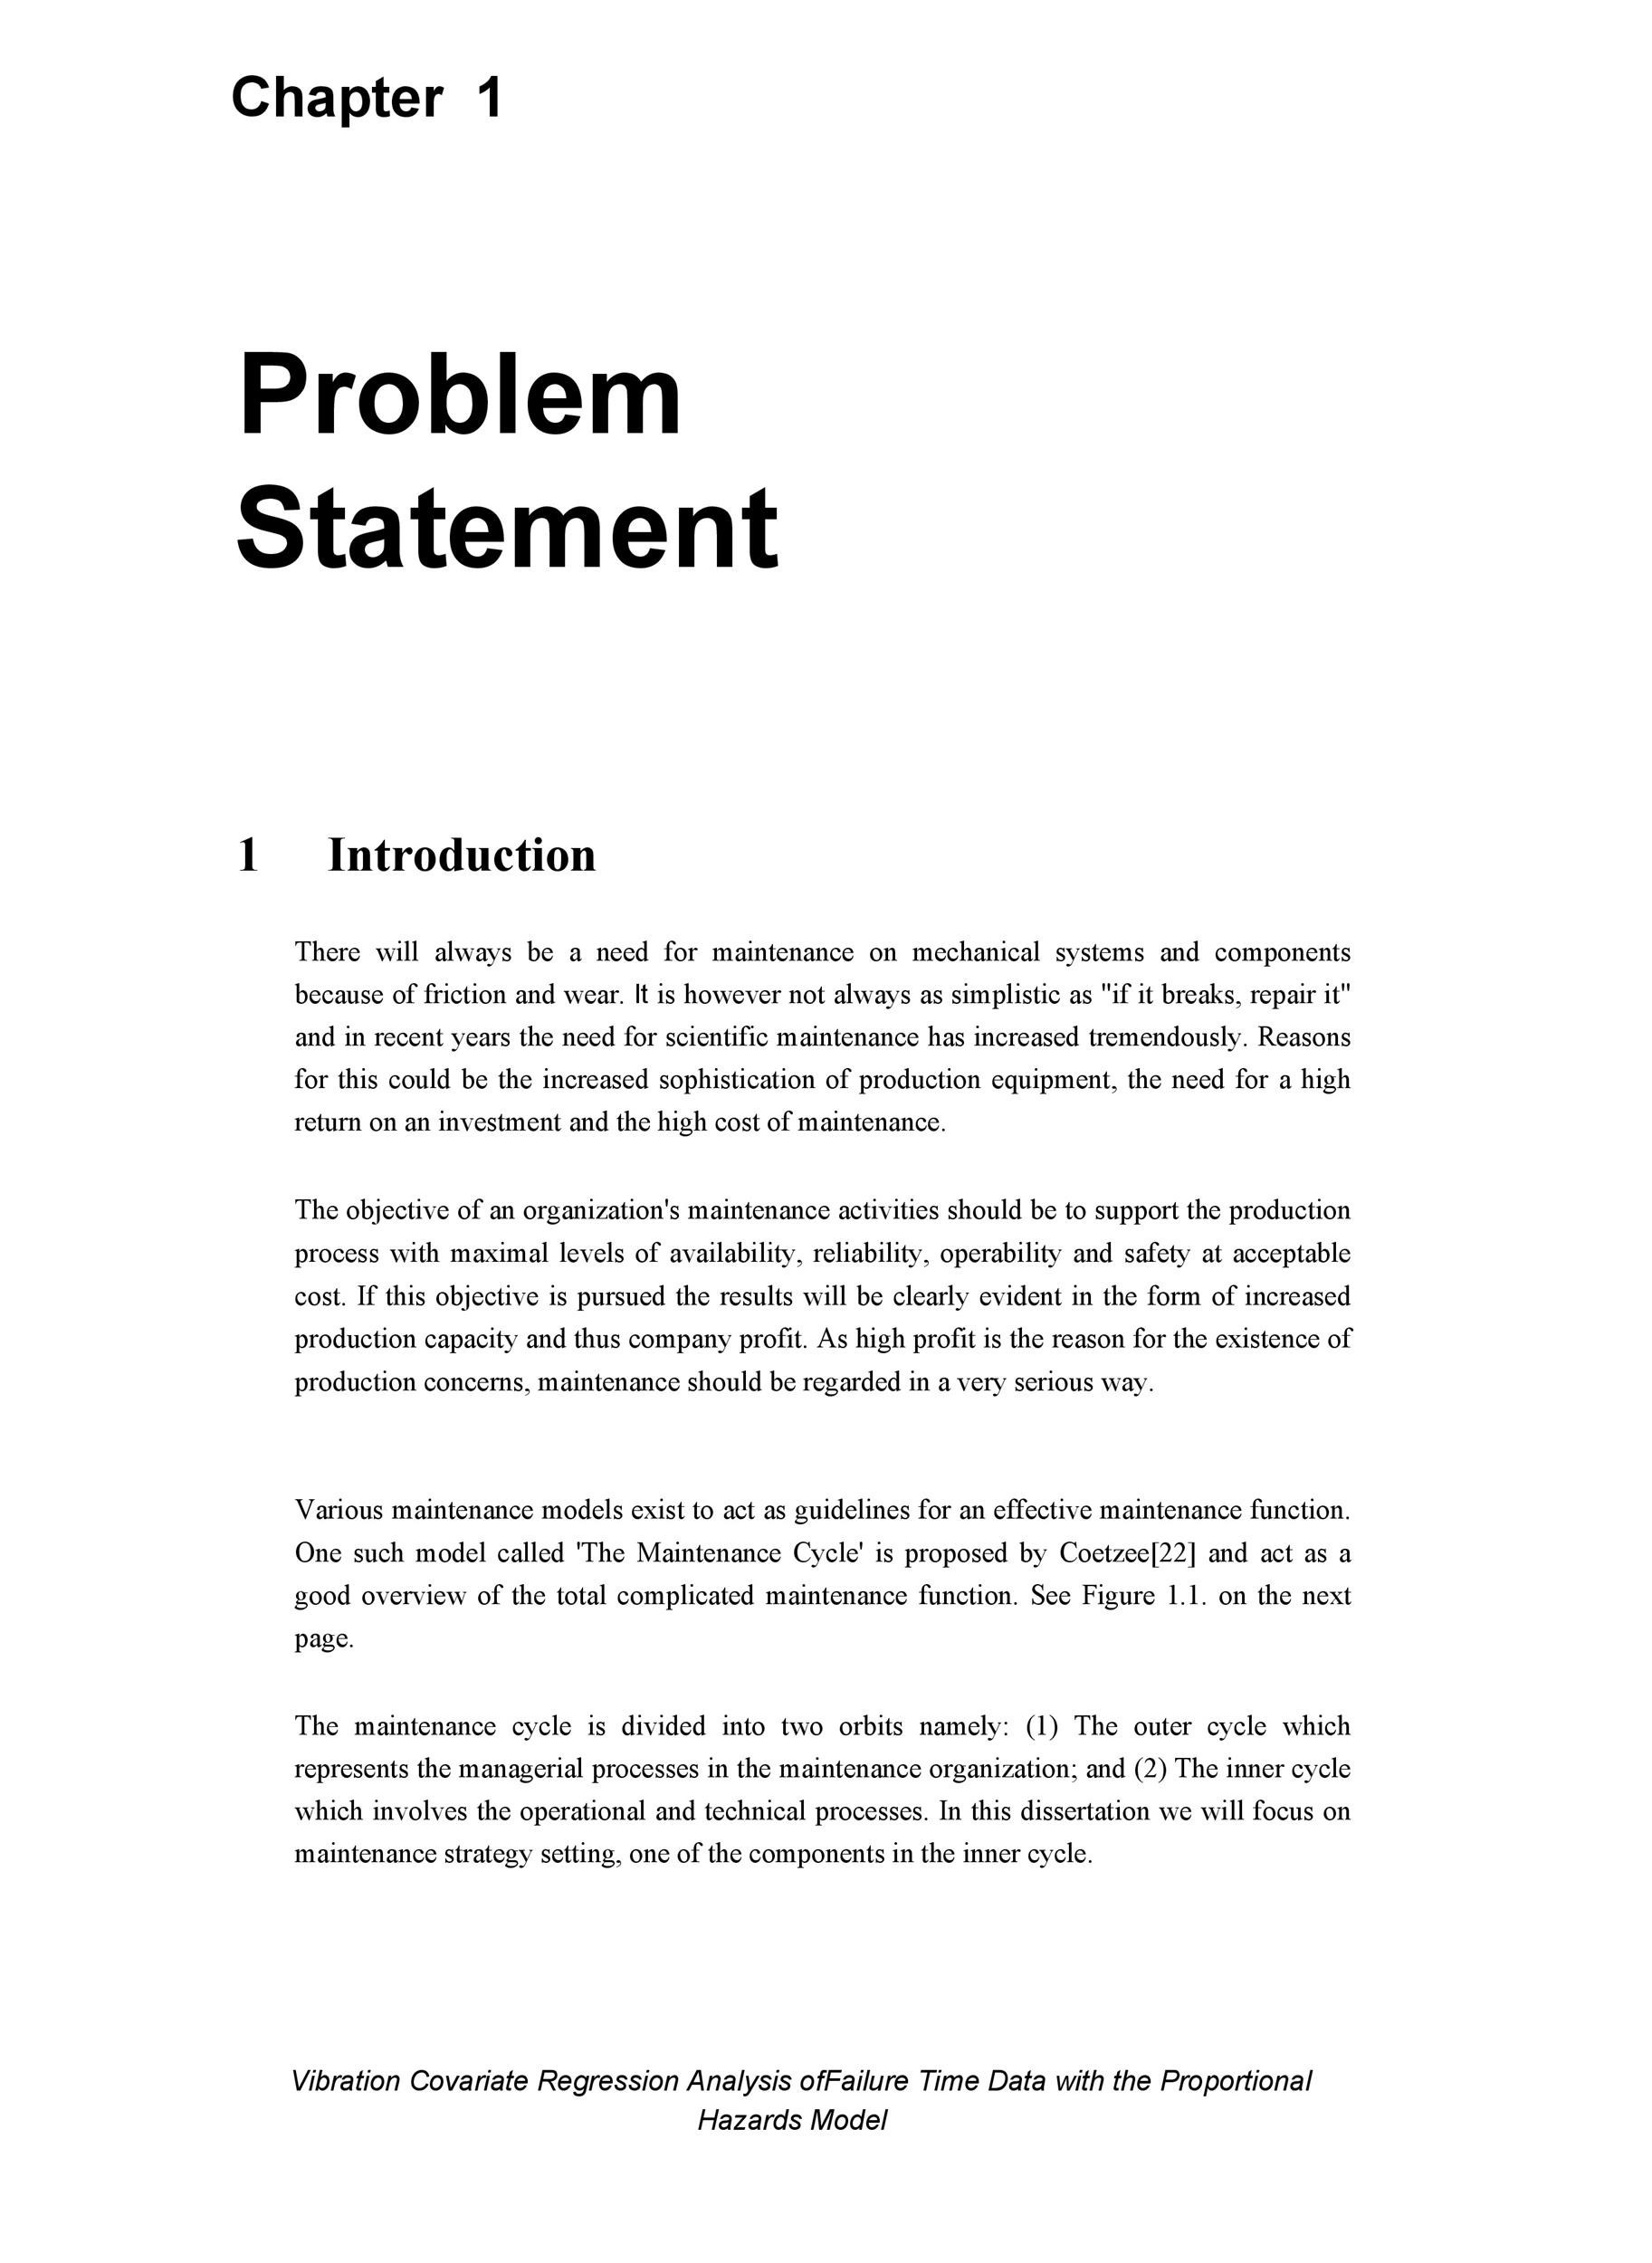 research article problem statement